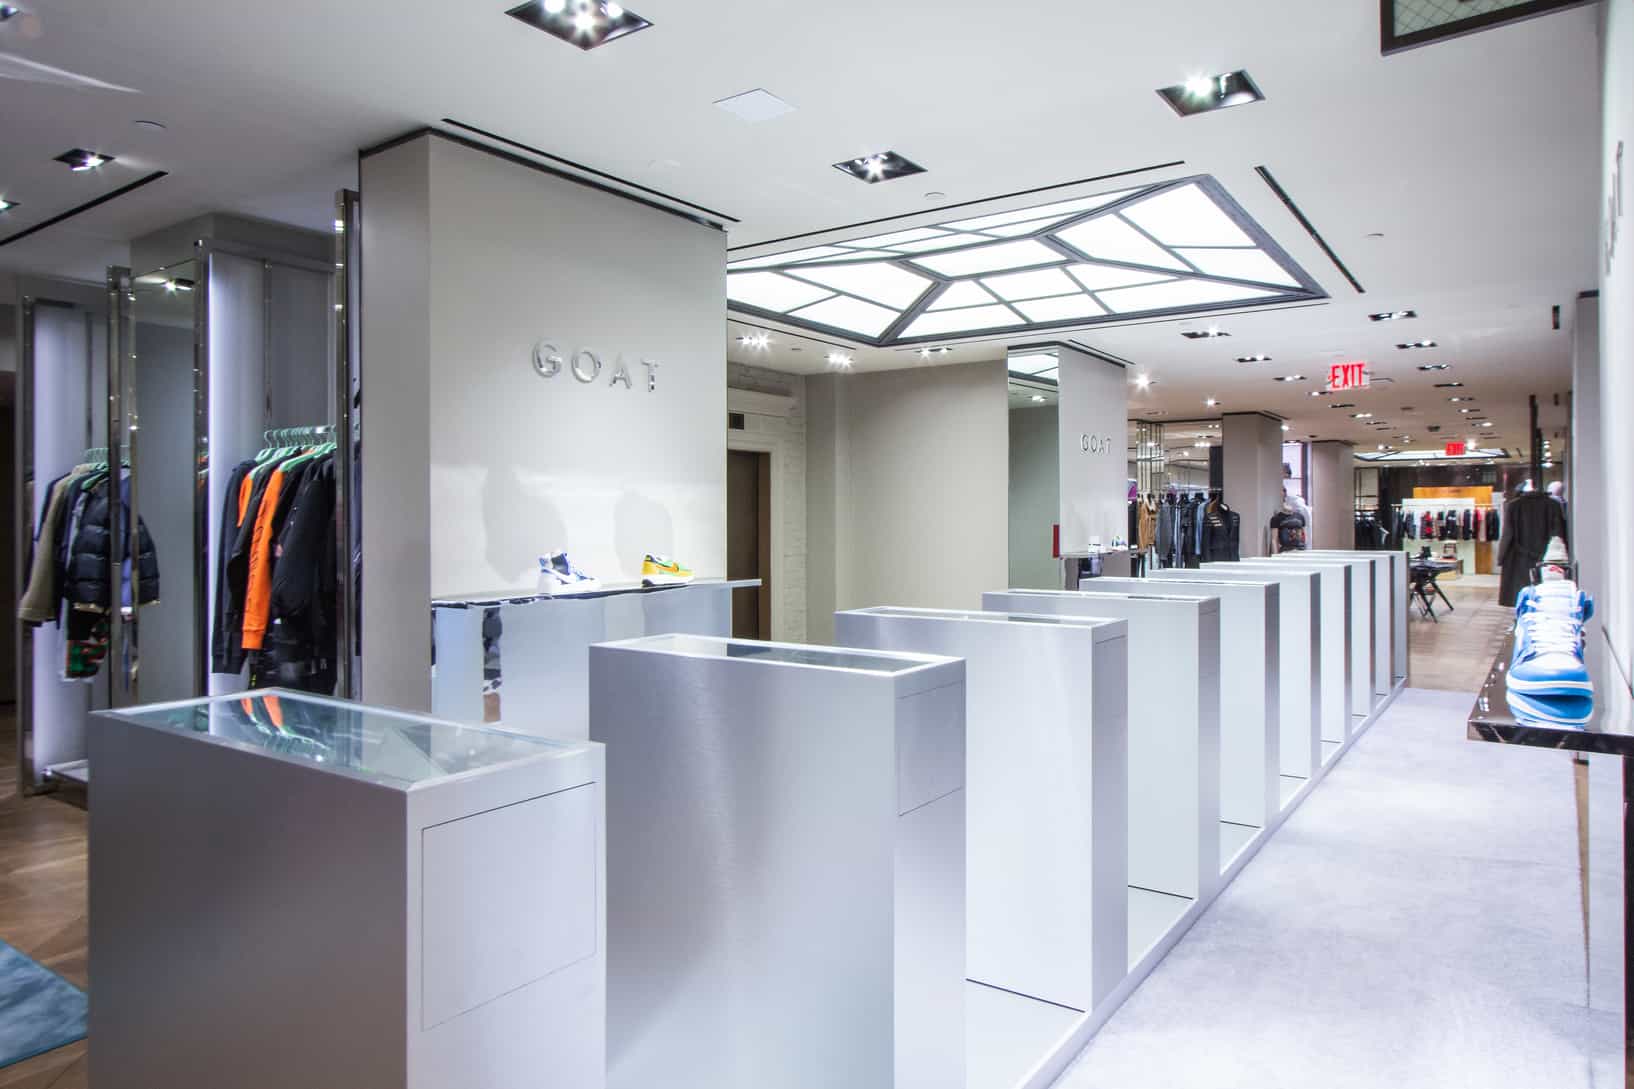 Surviving 10 Hours and 32 Minutes at Bergdorf Goodman - The New